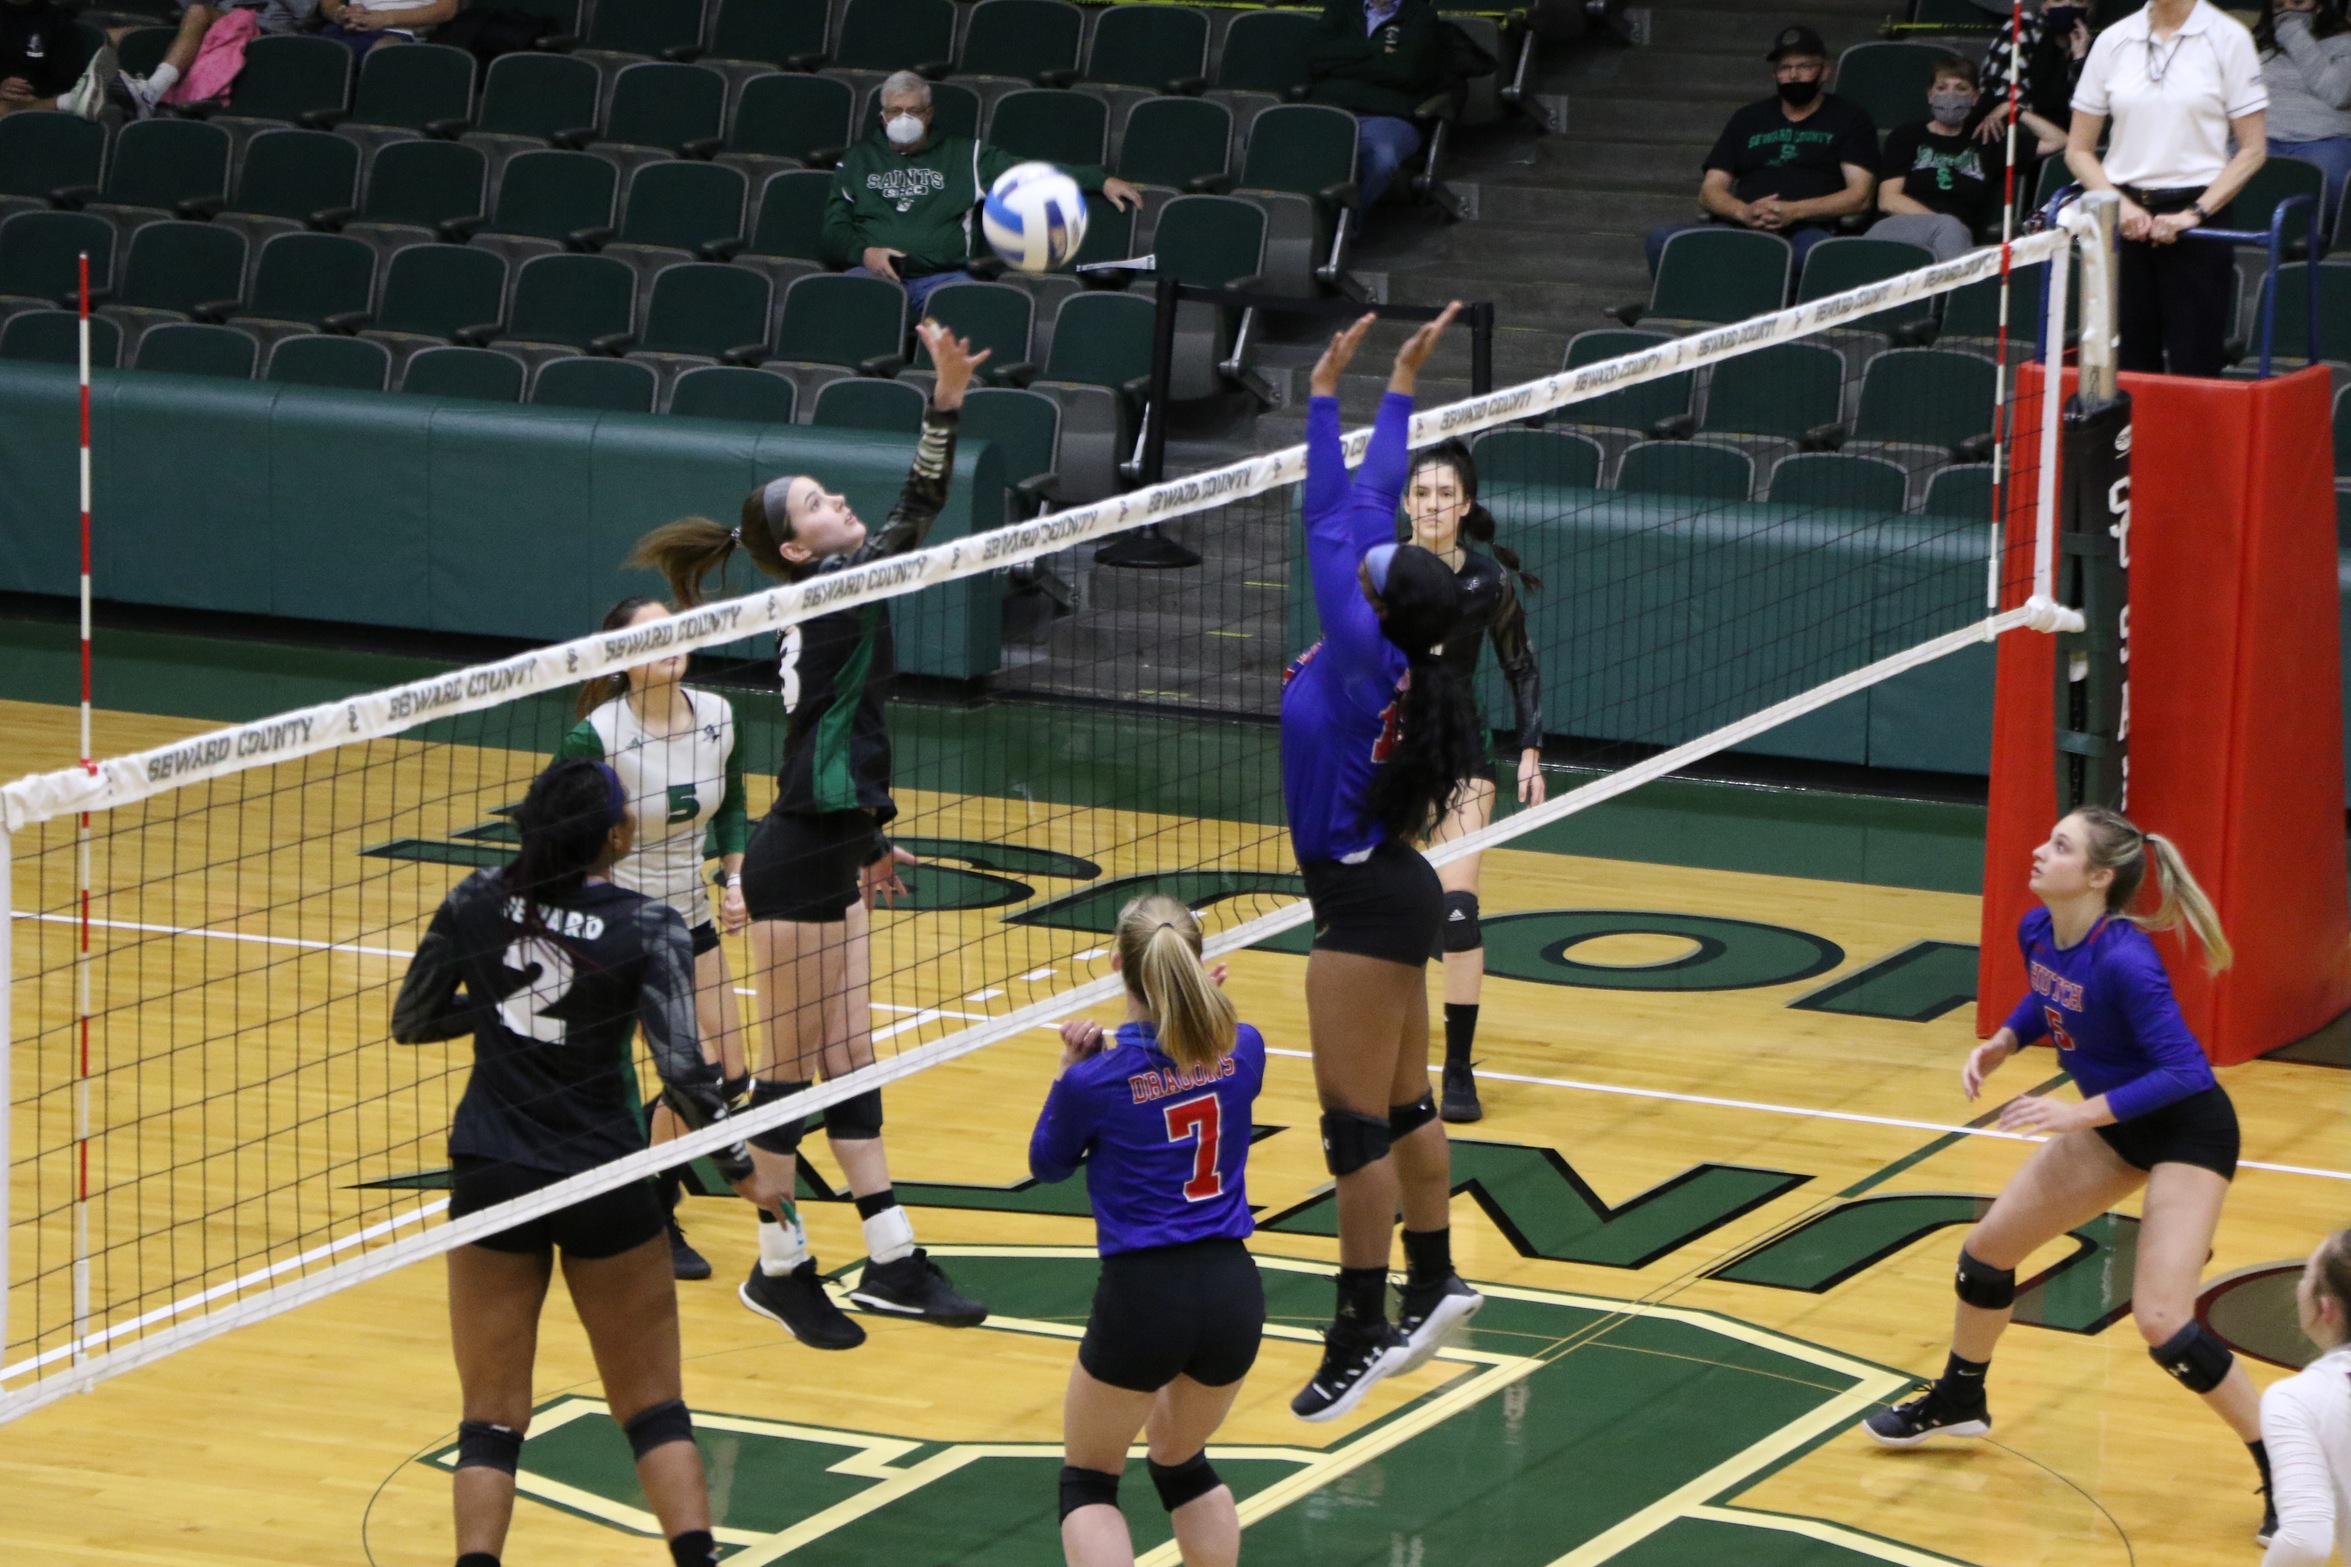 No. 6 Lady Saints losses thier first confrence game 3-1 to Hutchinson